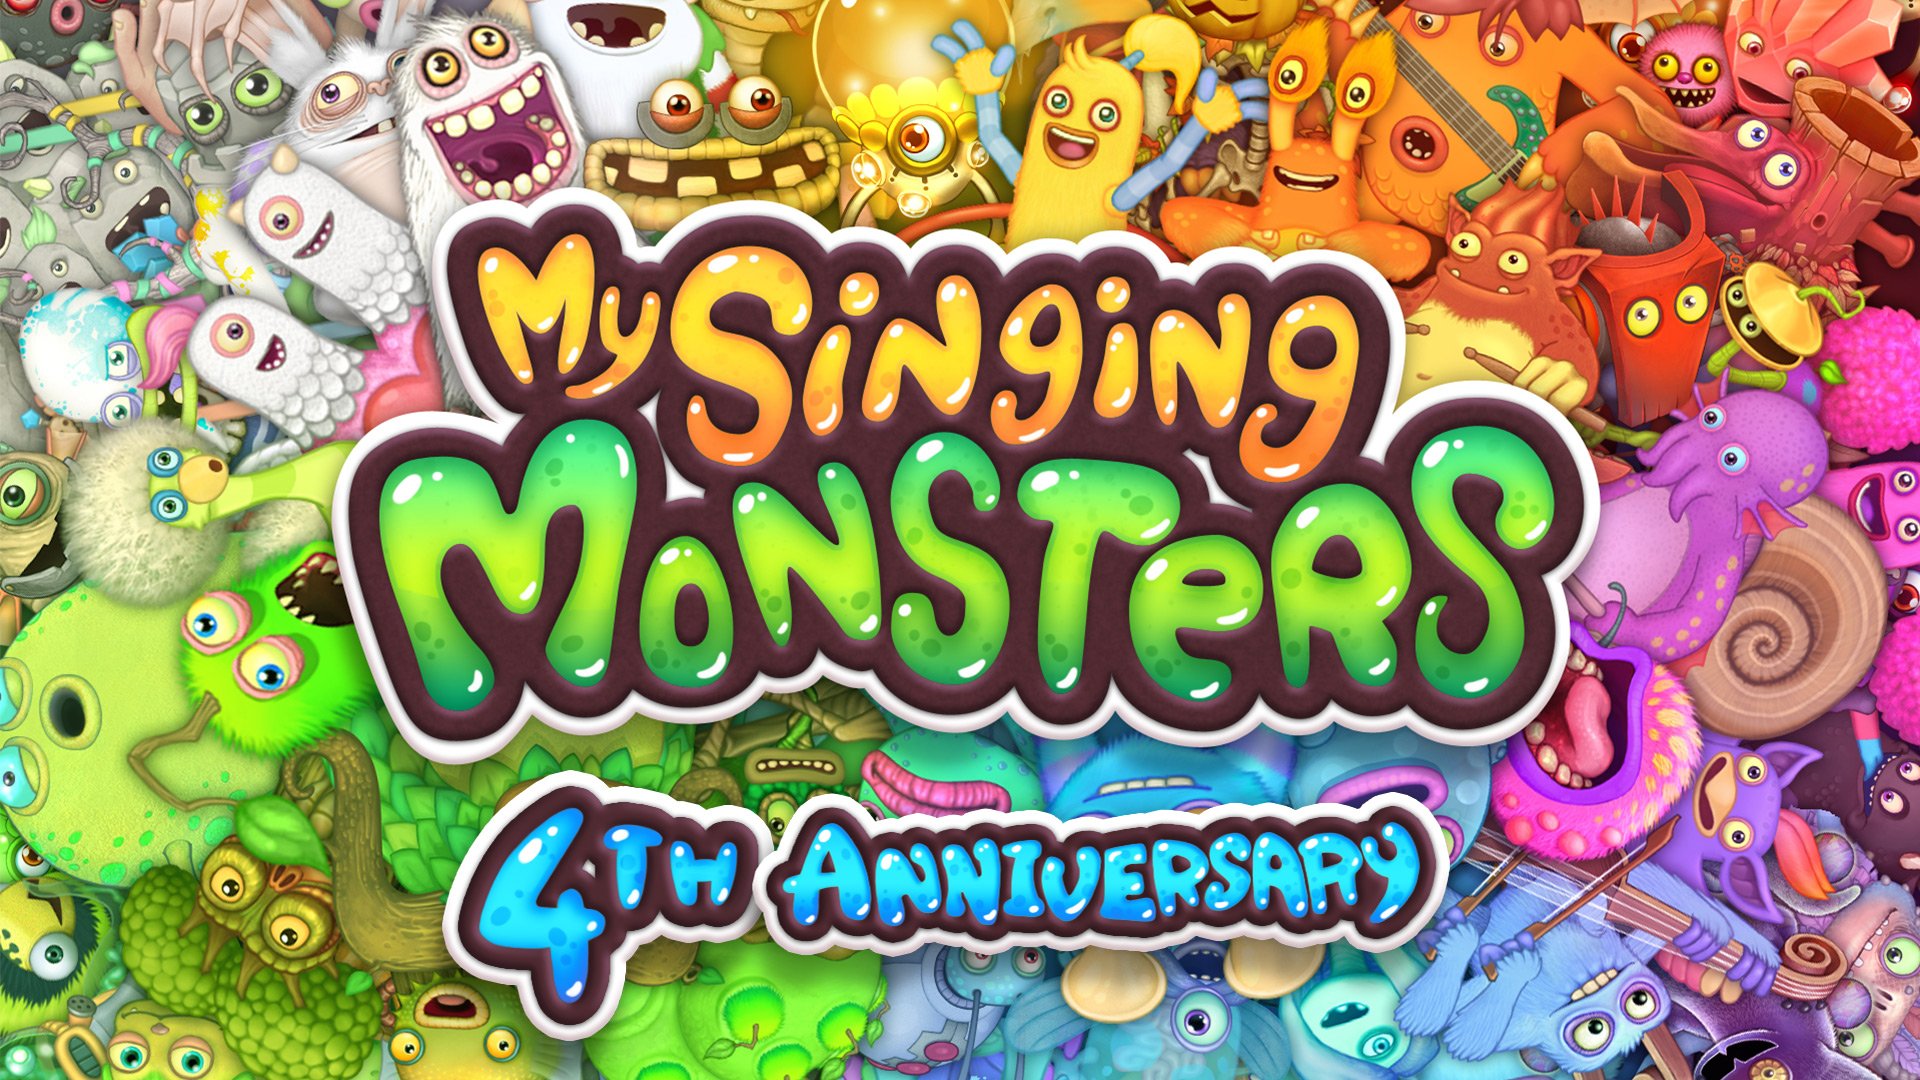 My Singing Monsters a special treat for Anniversary Month, brand new My Singing Monsters wallpaper!